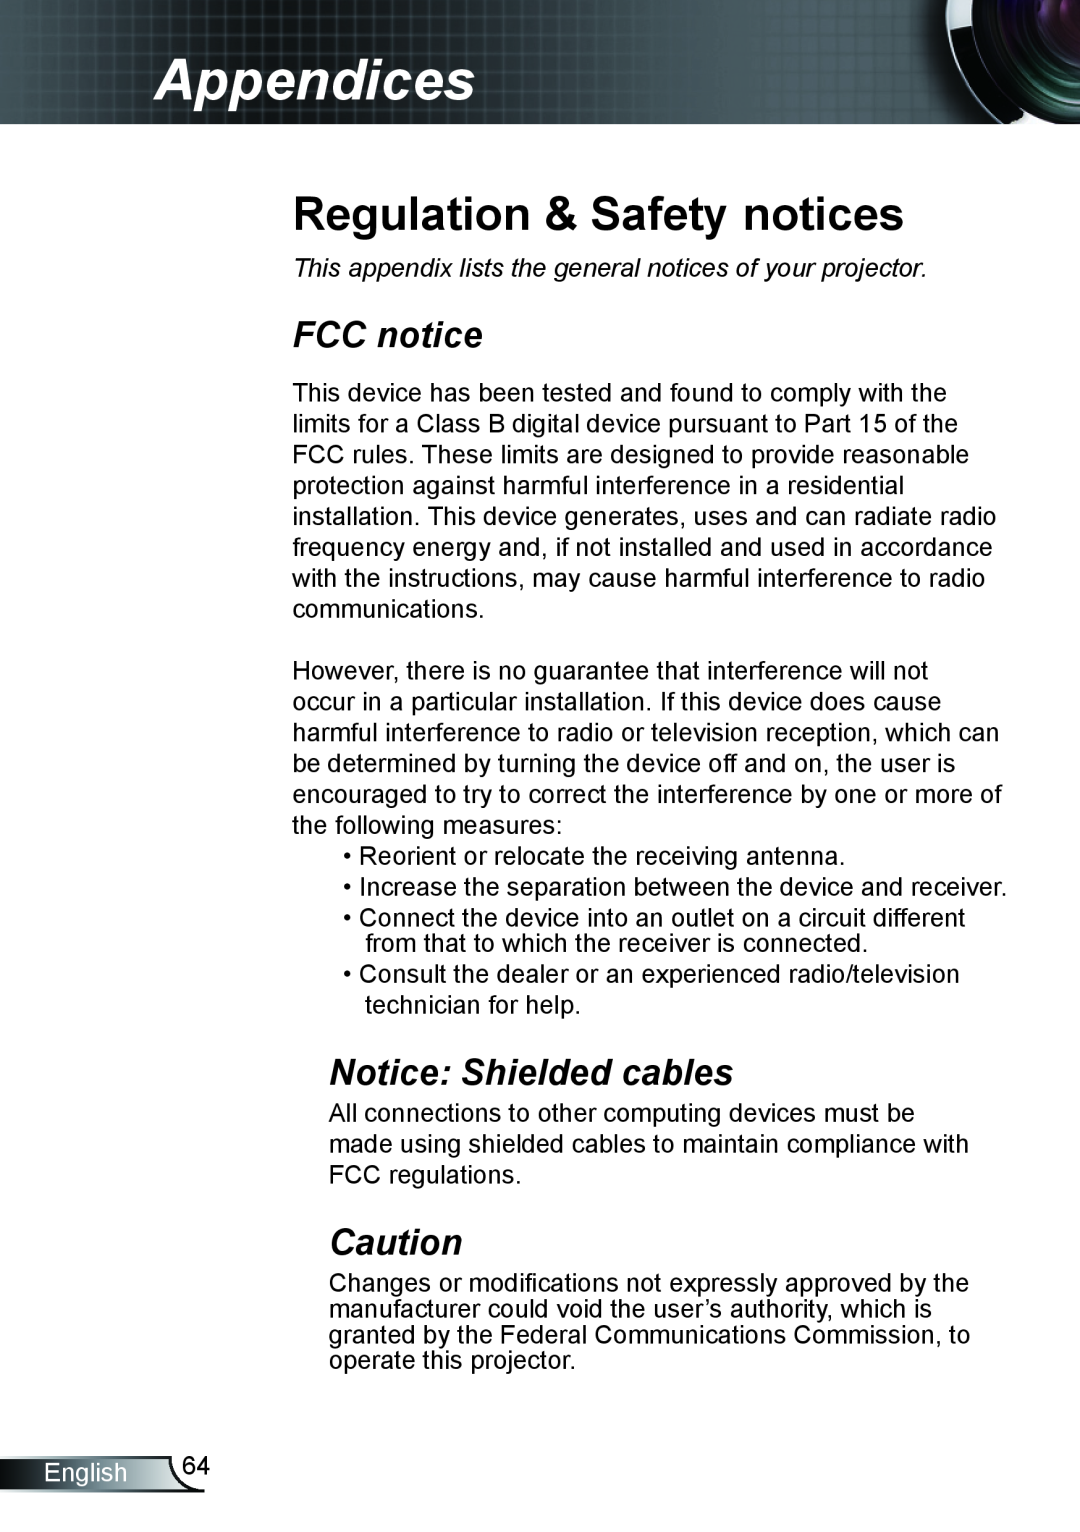 Optoma Technology EX615 FCC notice, Notice Shielded cables, This appendix lists the general notices of your projector 